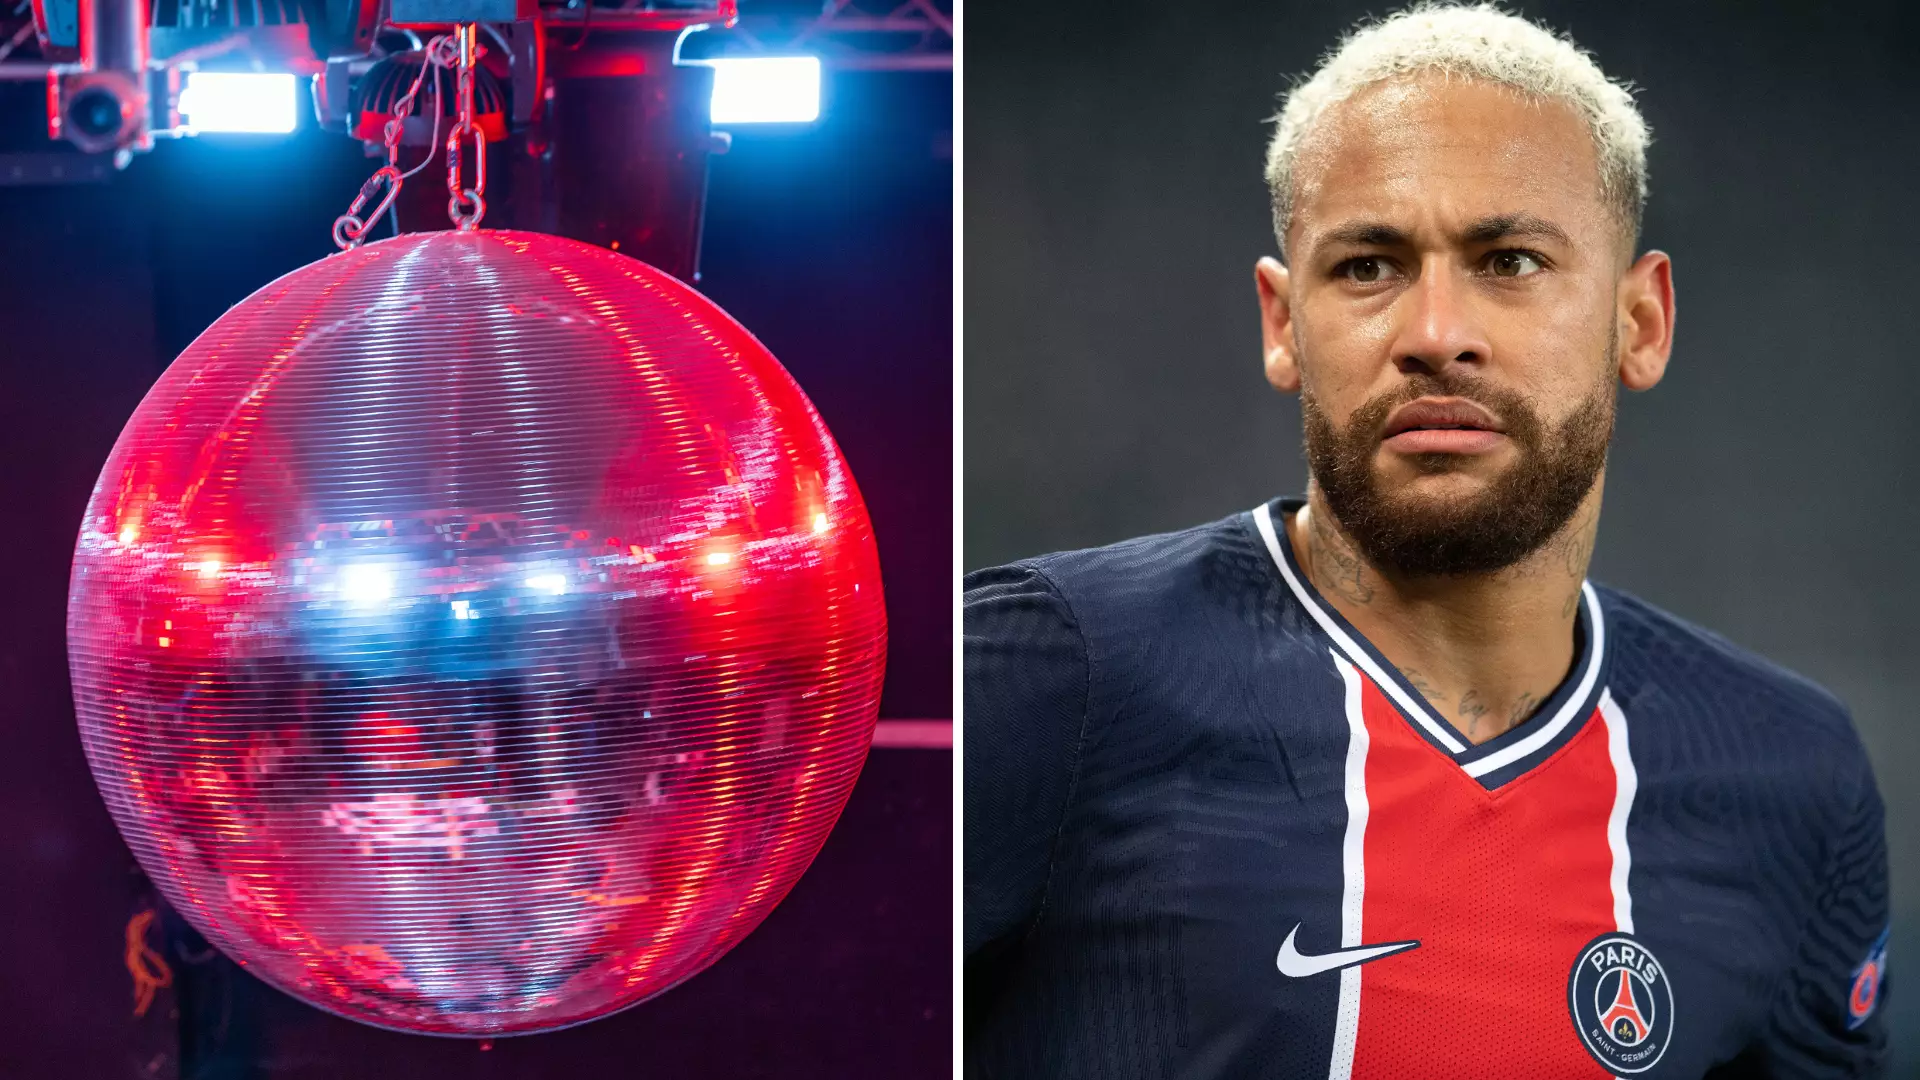 PSG Superstar Neymar 'In Trouble' After Organising Underground Party With 500 Guests Amid Coronavirus Pandemic